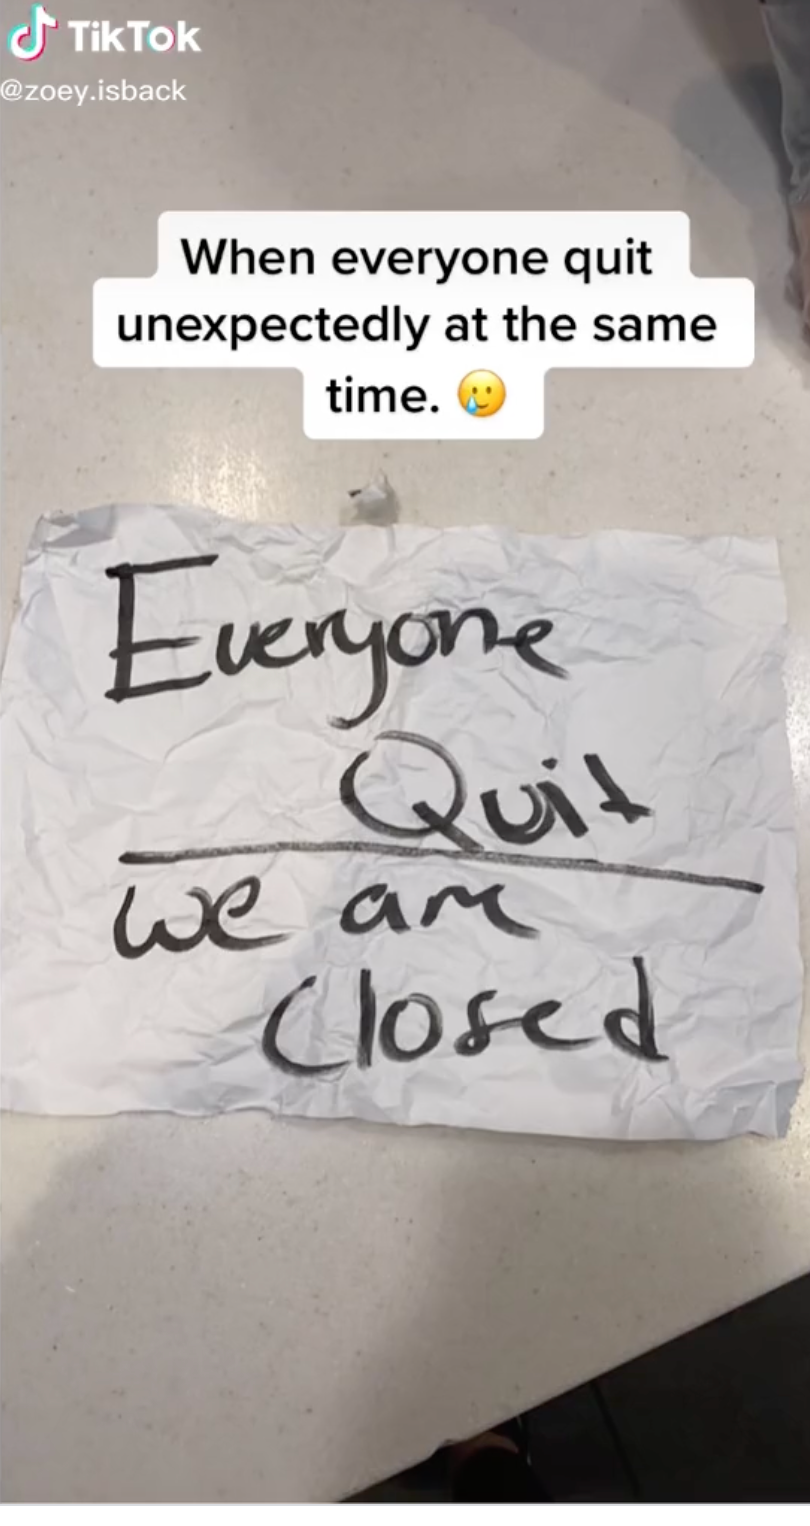 This signed was featured on the door of the McDonalds in the TikTok video